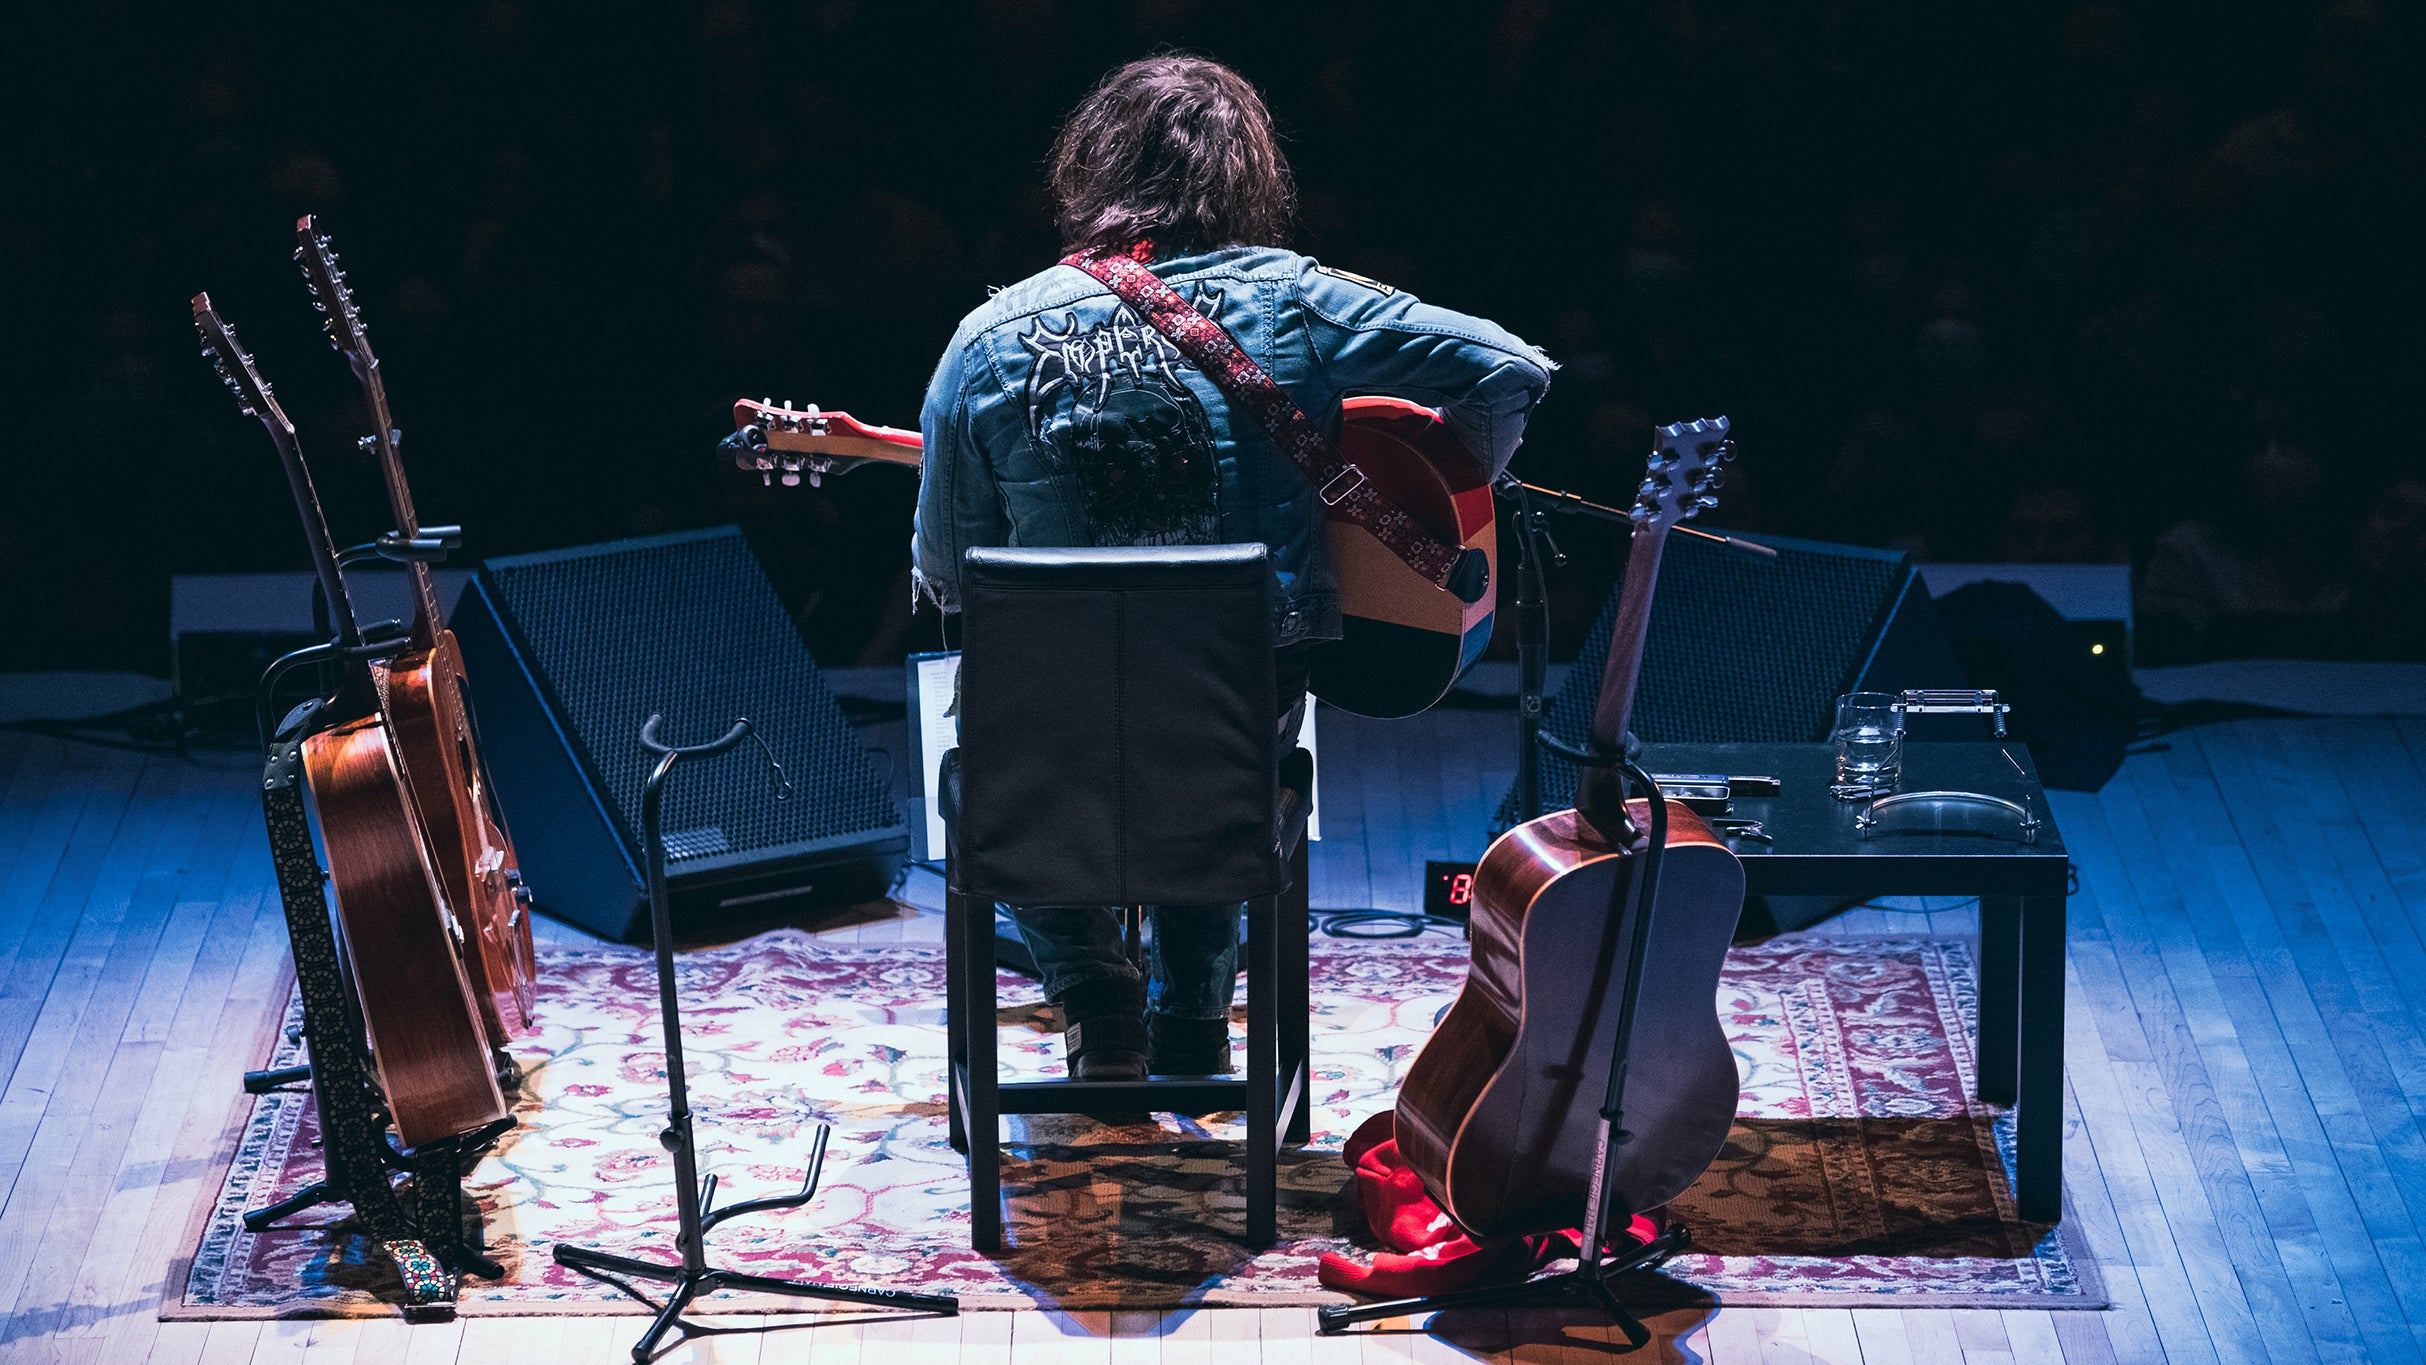 presale password for RYAN ADAMS: SOLO 2024 face value tickets in Birmingham at The Lyric Theatre